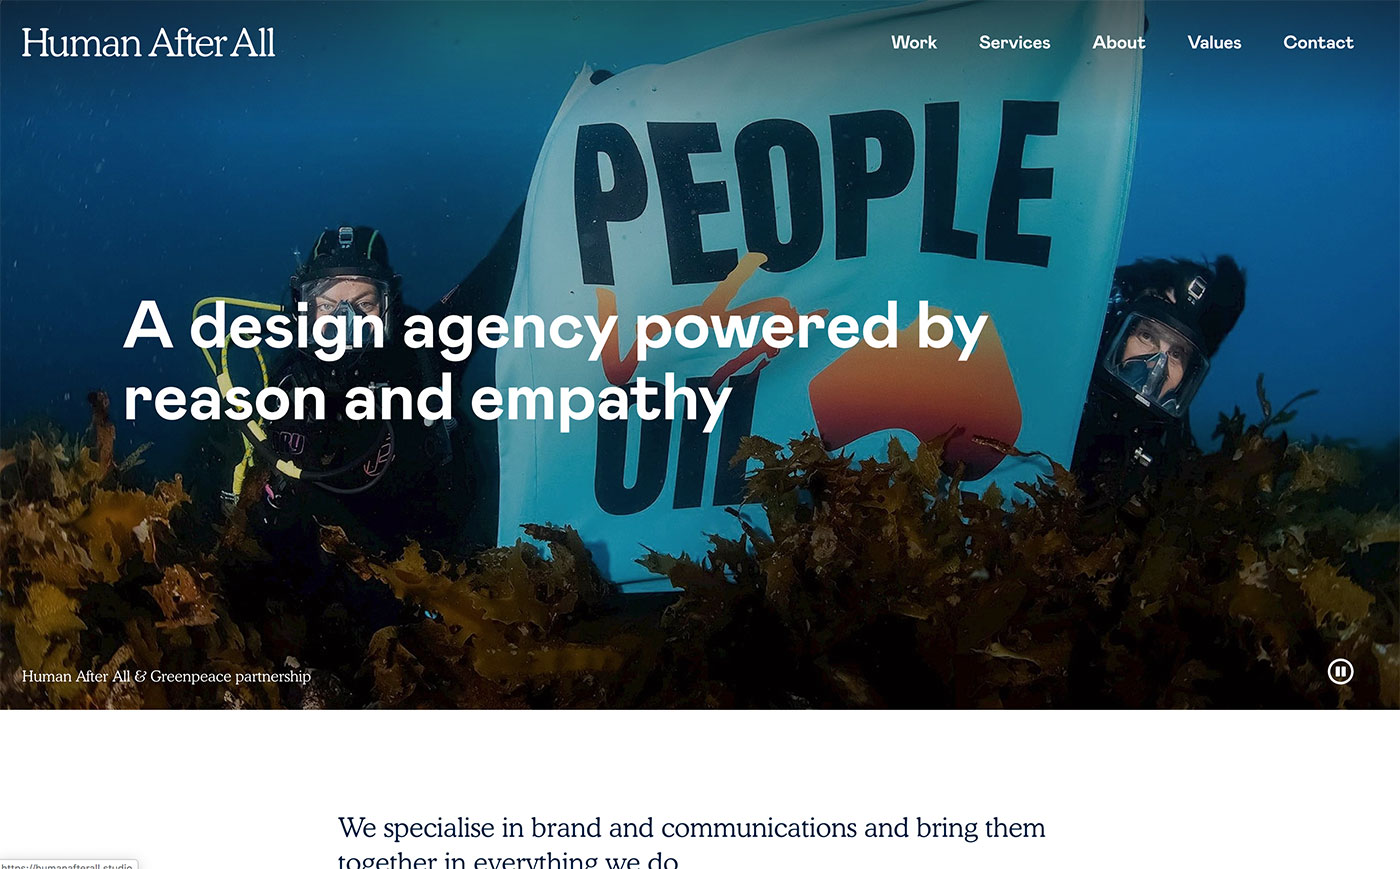 Human After All design agency